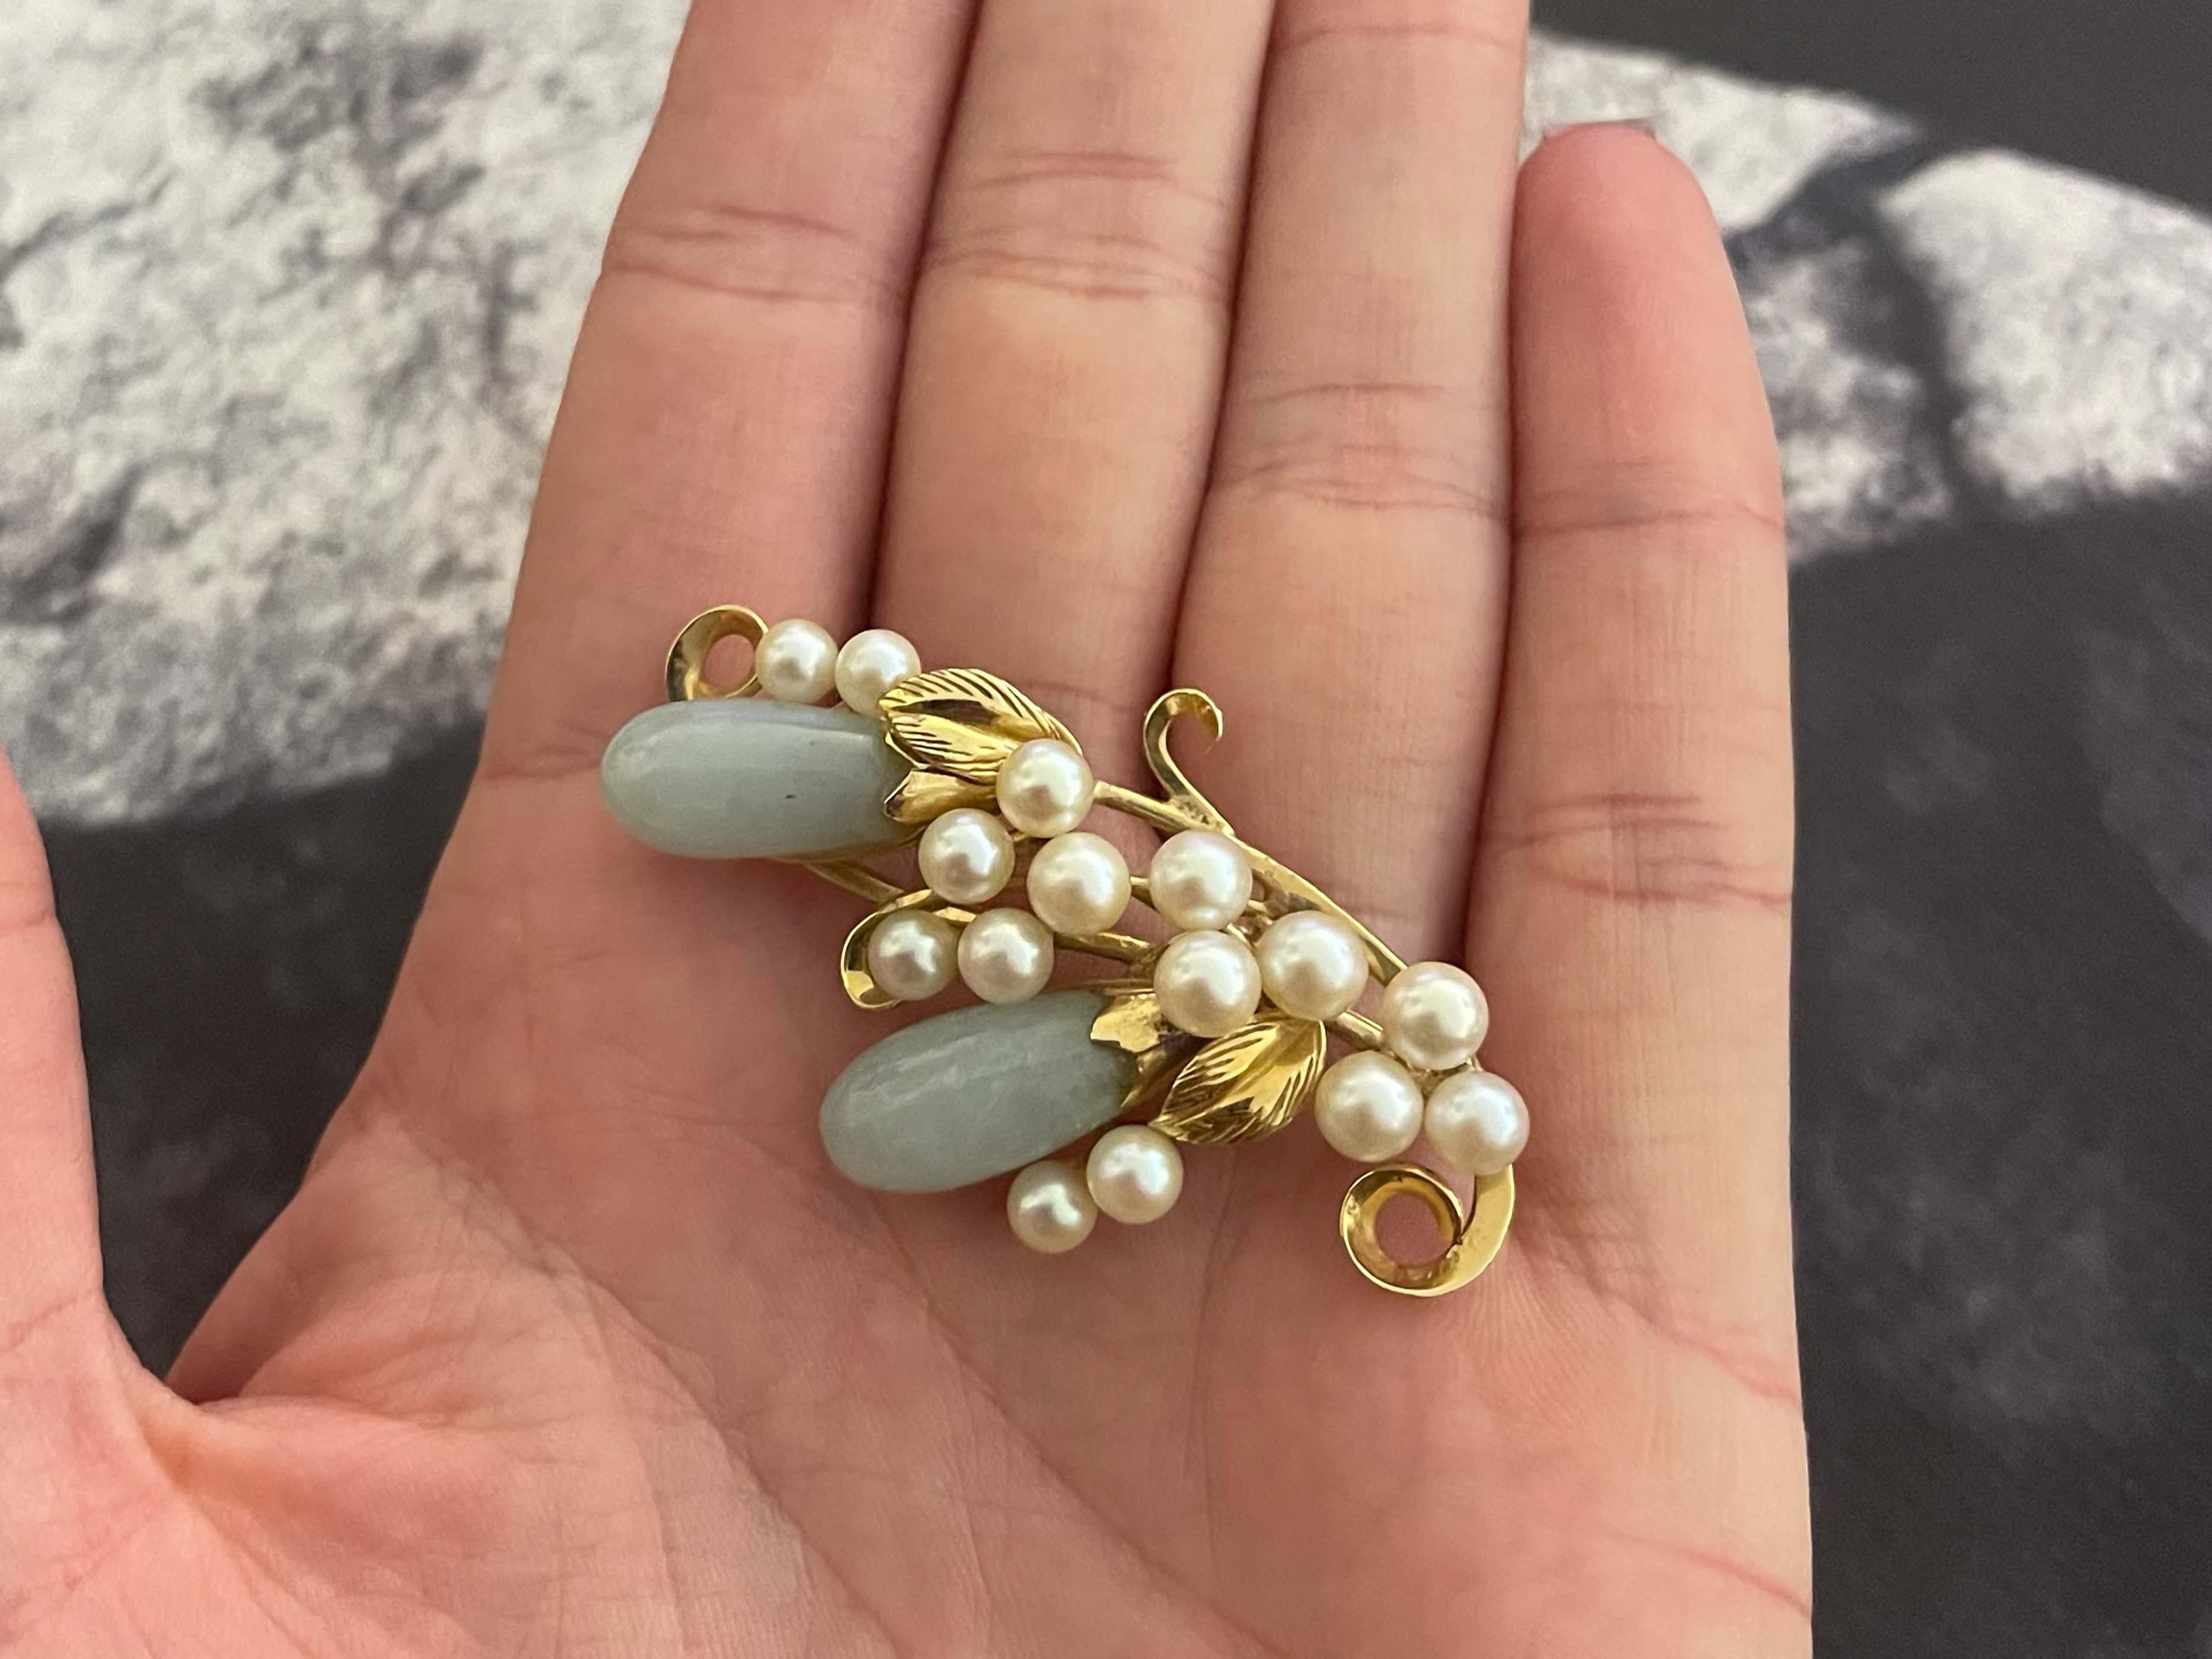 Brooch Specifications:

Designer: Ming's

Metal: 14k Yellow Gold

Total Weight: 12 Grams

Stones: Jade and akoya pearls

Brooch Measurements: 2